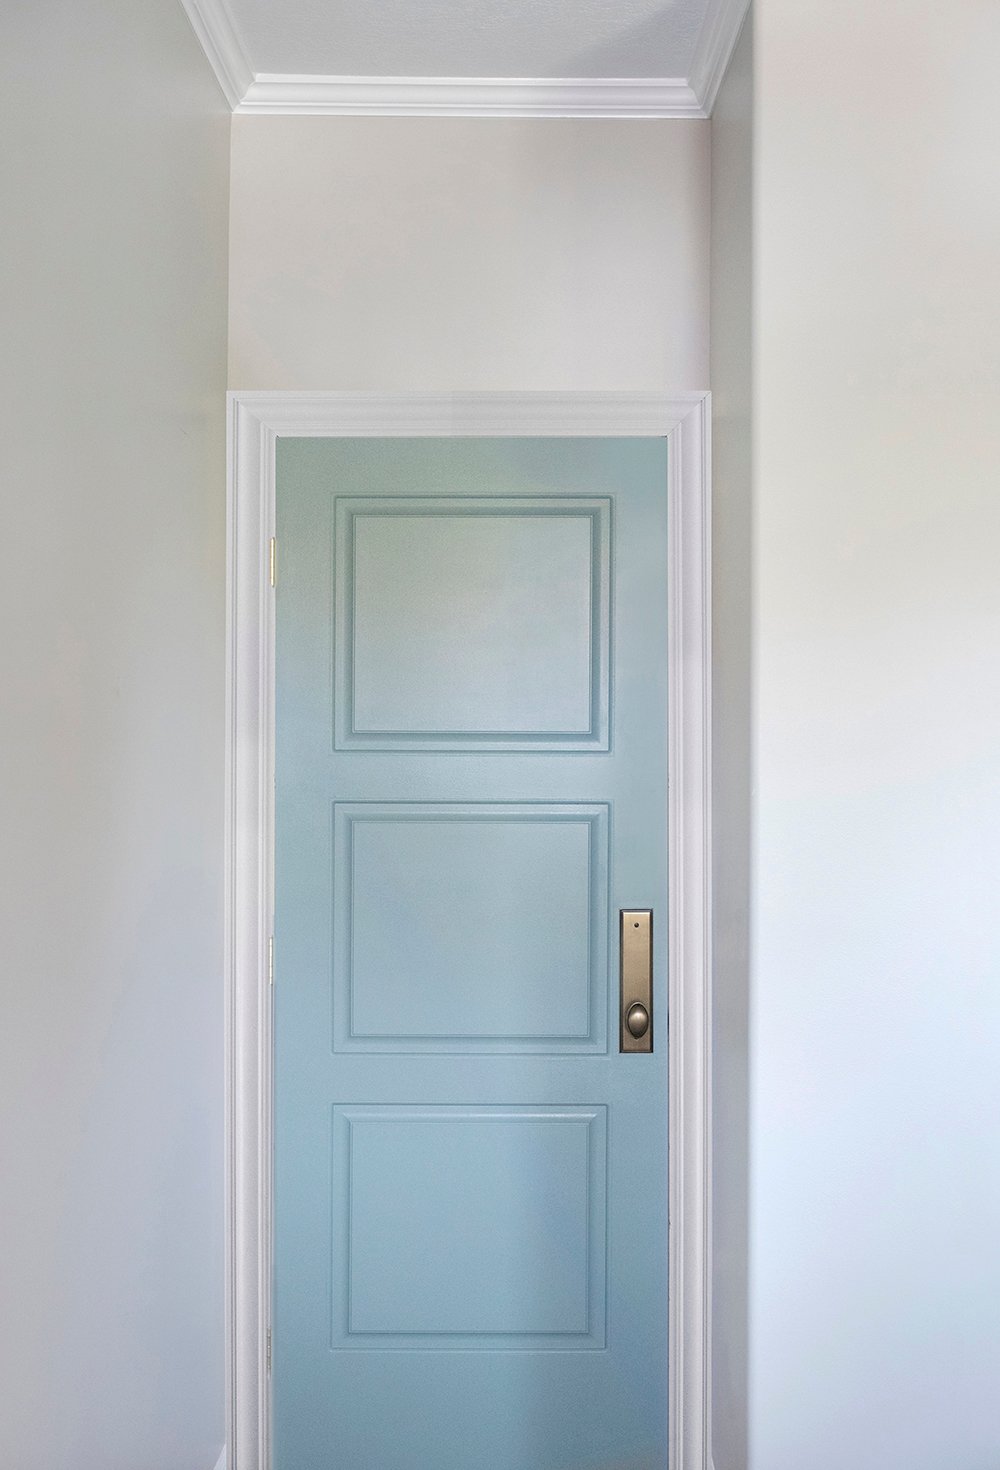 How to Paint a Door - roomfortuesday.com